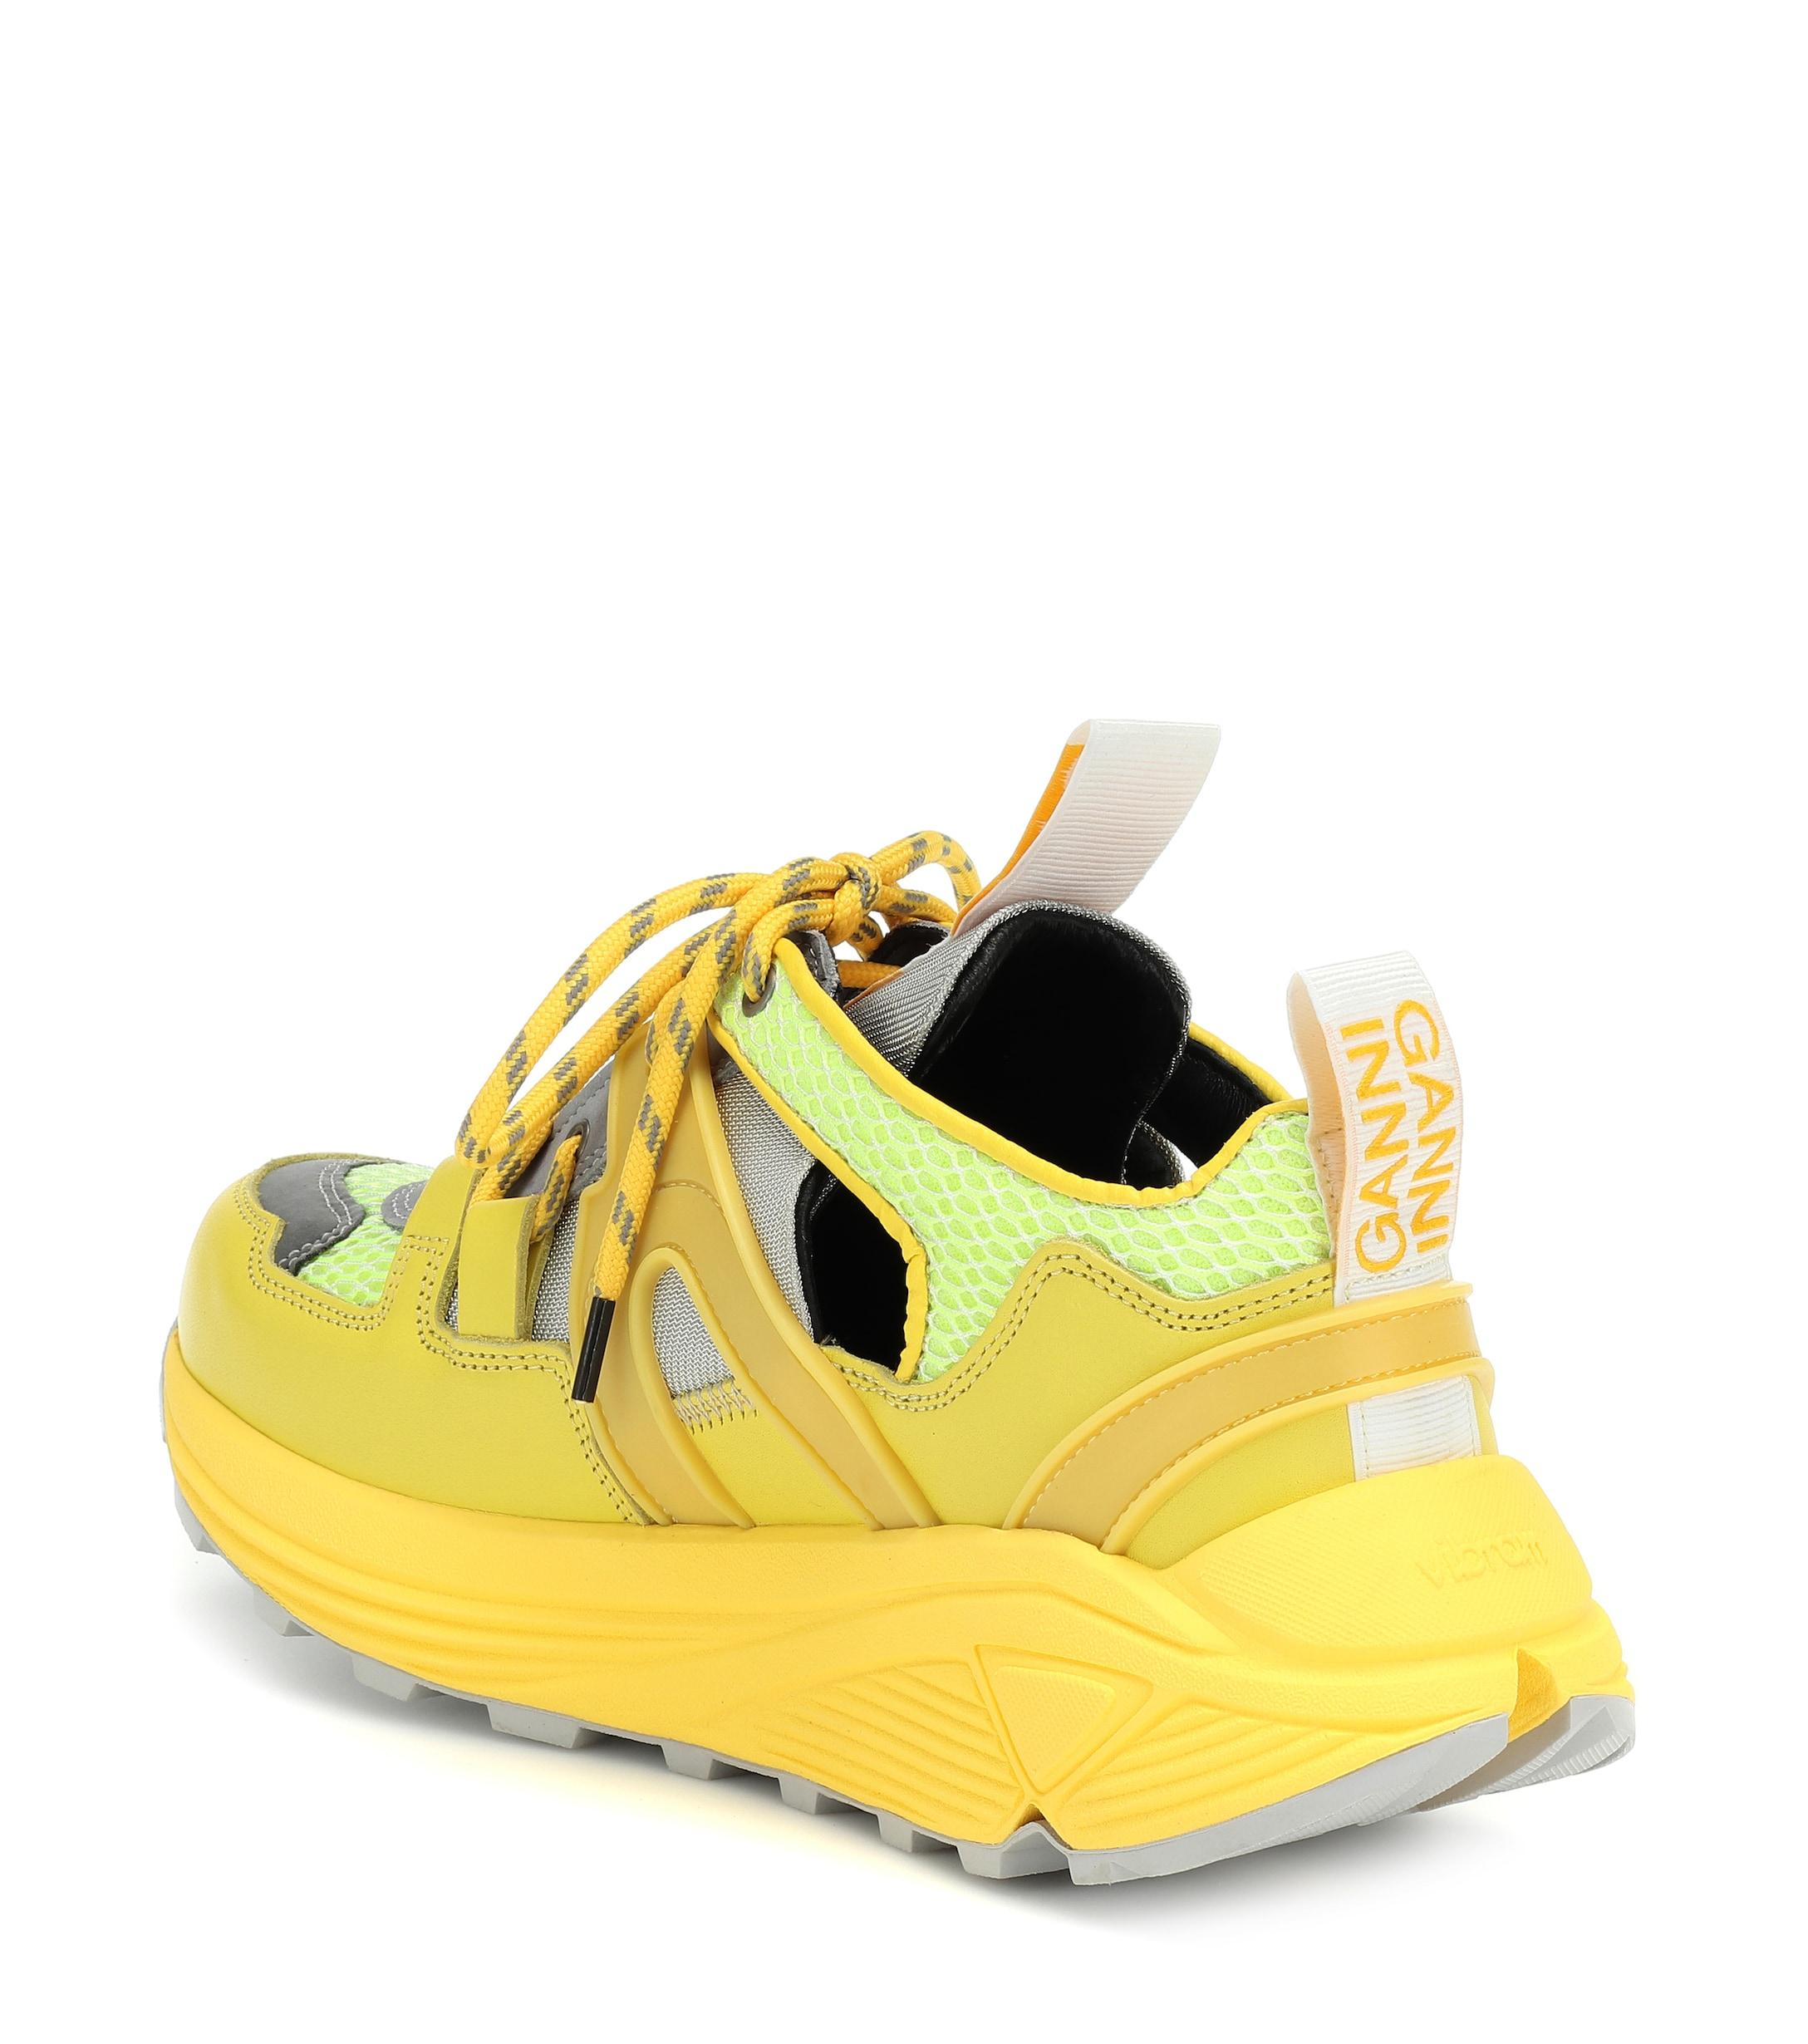 Ganni Leather Tech Sneakers in Yellow/Gray (Yellow) - Lyst